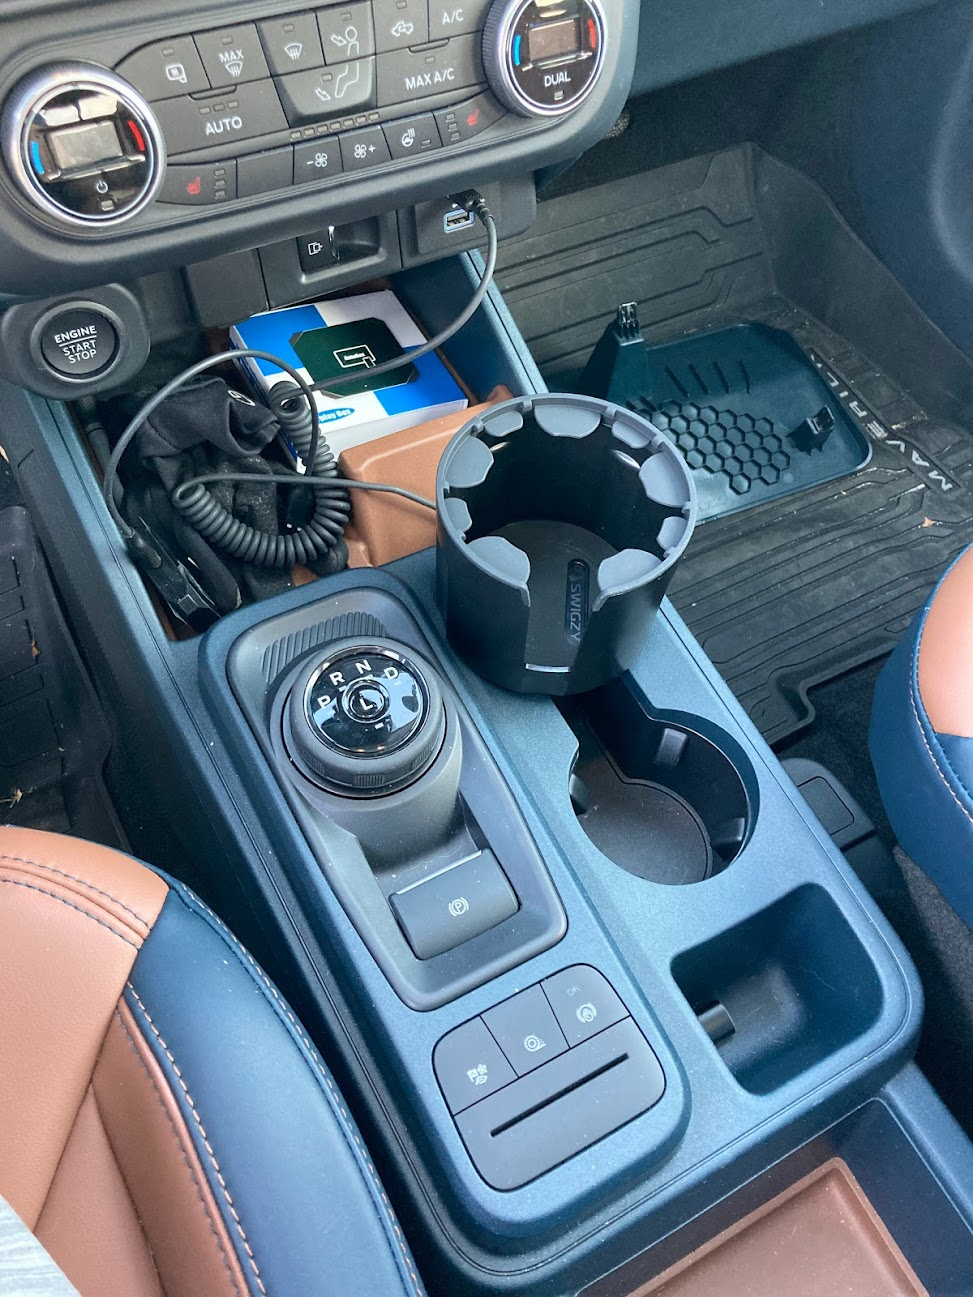 Swigzy Cup Holder Expander (pic of it in a Maverick)  MaverickTruckClub -  2022+ Ford Maverick Pickup Forum, News, Owners, Discussions